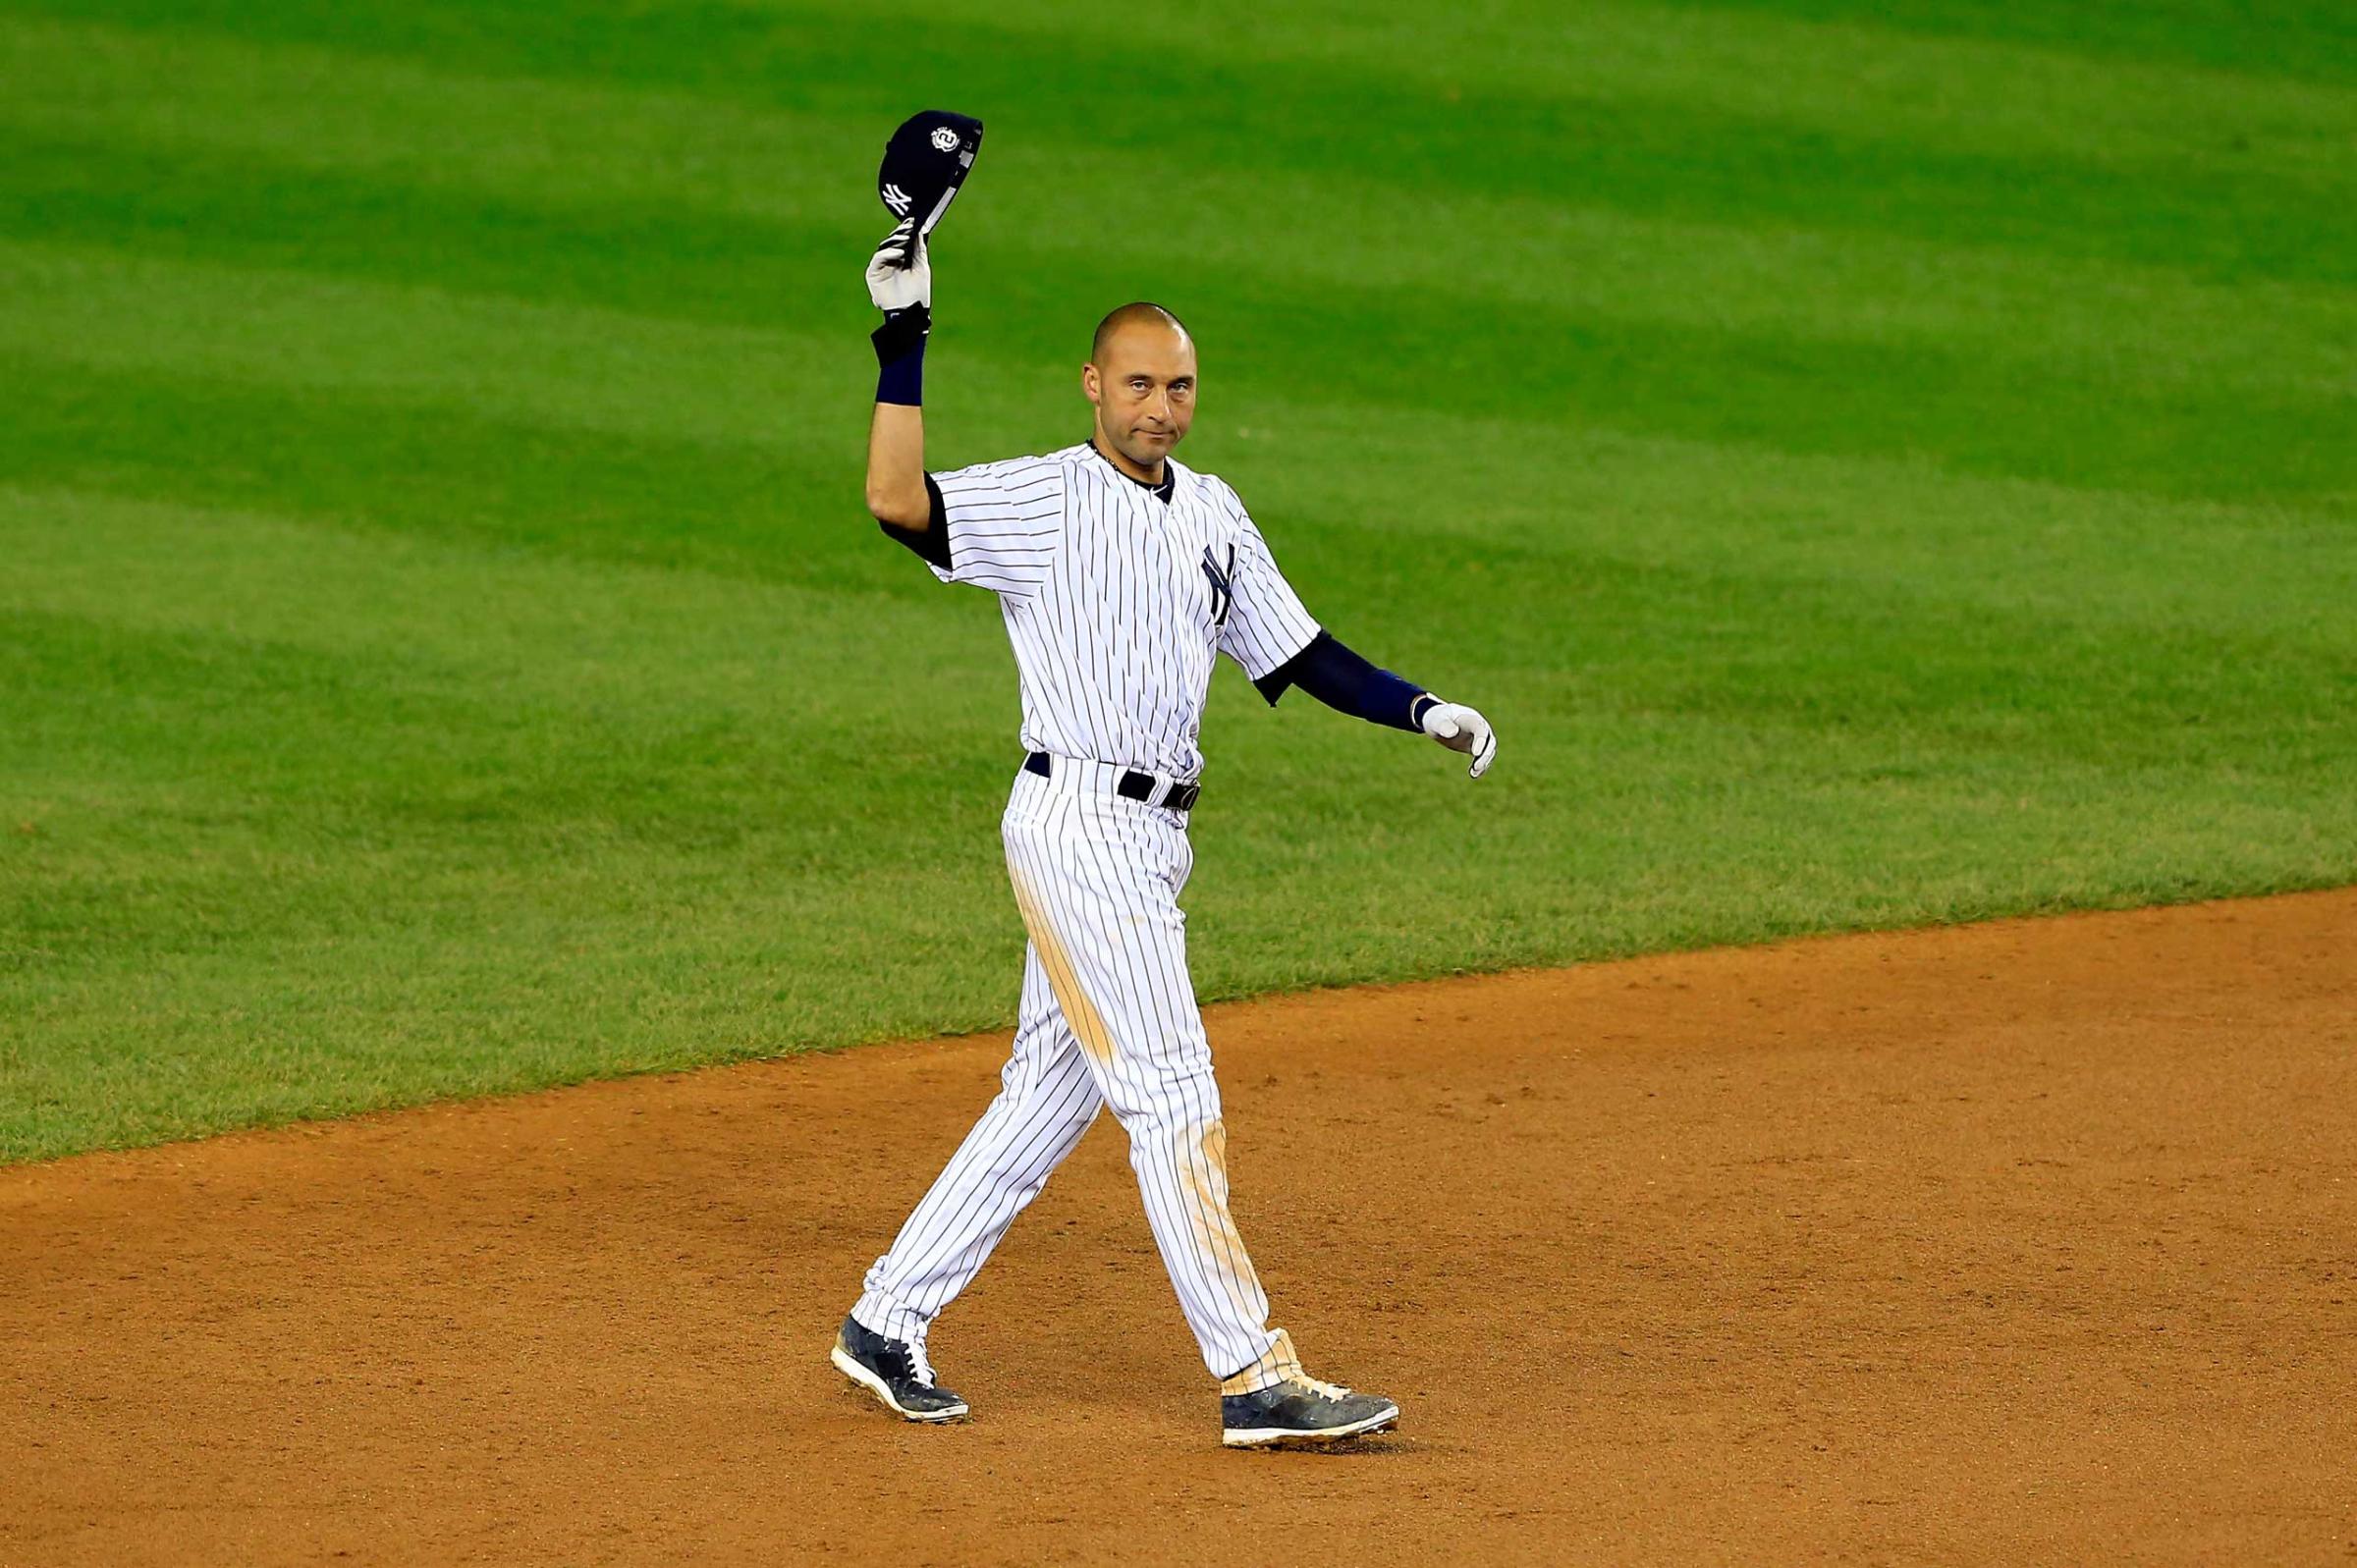 Derek Jeter gestures to the fans after a game winning RBI hit in the ninth inning against the Baltimore Orioles in his last game ever at Yankee Stadium on Sept. 25, 2014.